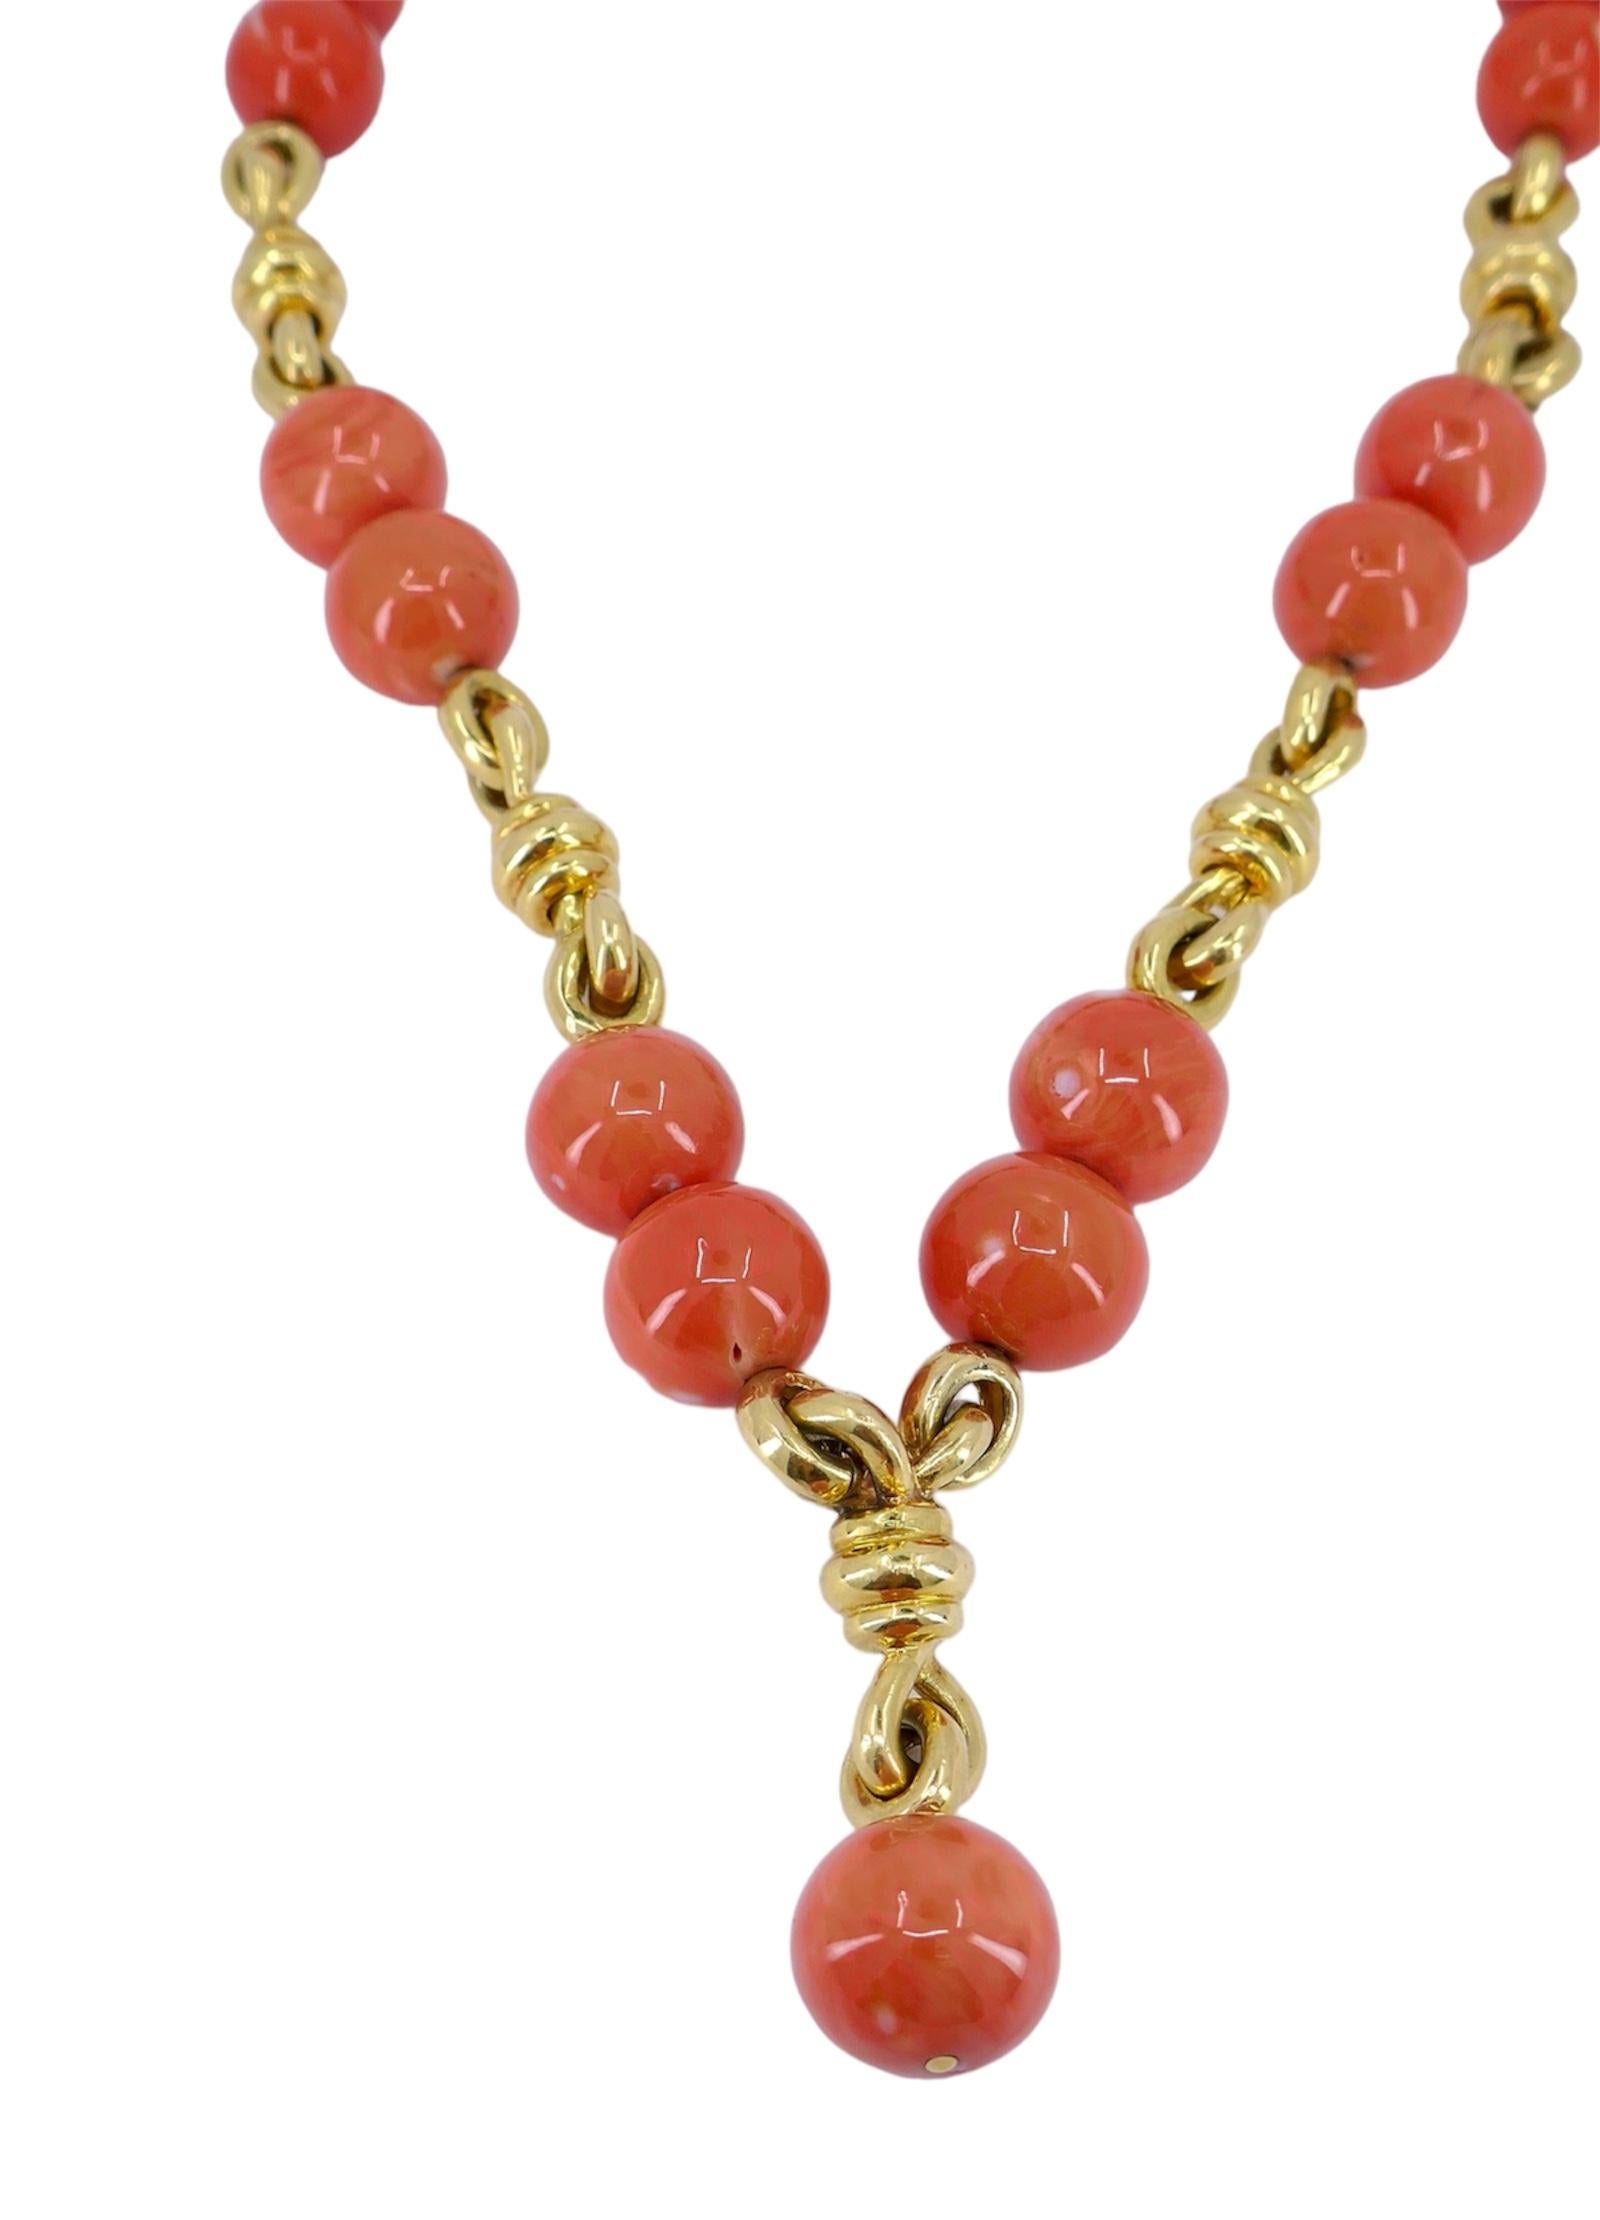 Vintage Aldo Cipullo Cartier 18k Gold Coral Necklace In Good Condition For Sale In Beverly Hills, CA